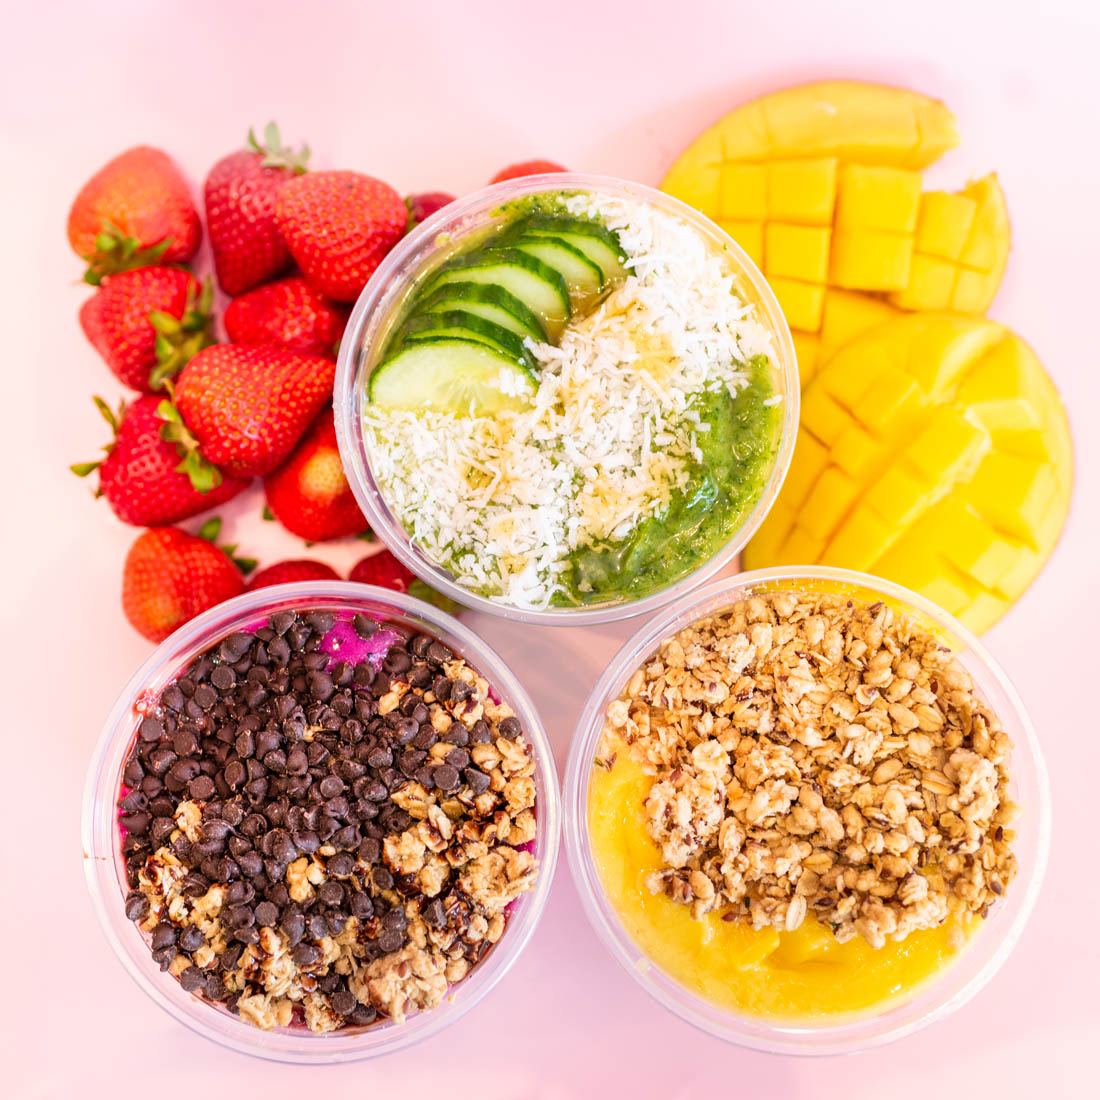 Rush Bowls smoothie bowls nutrition info in Fort Collins, CO.